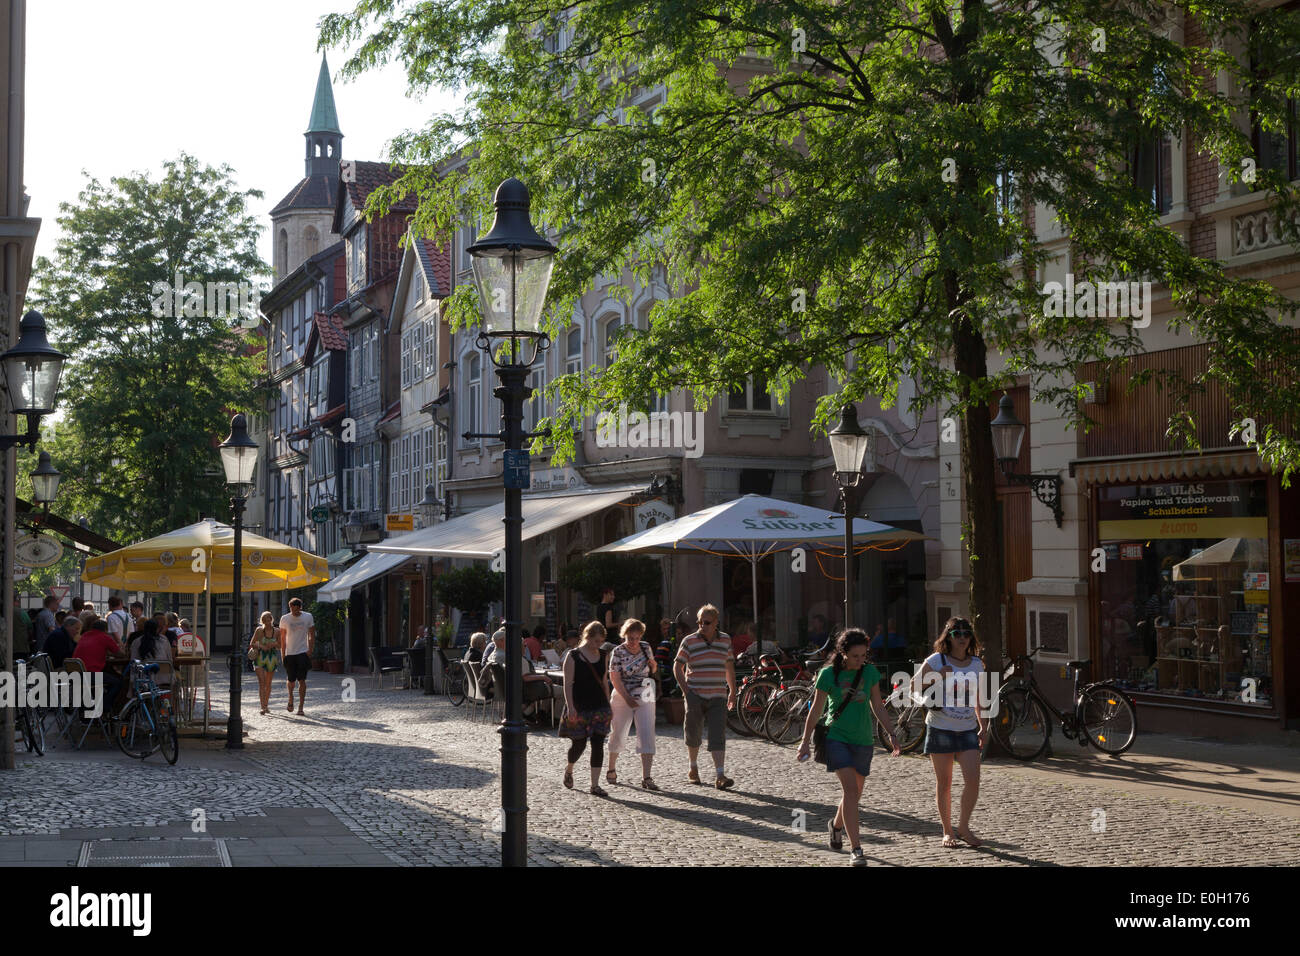 Magni district with historic half-timber houses and cafes, Brunswick, Lower Saxony, Germany Stock Photo